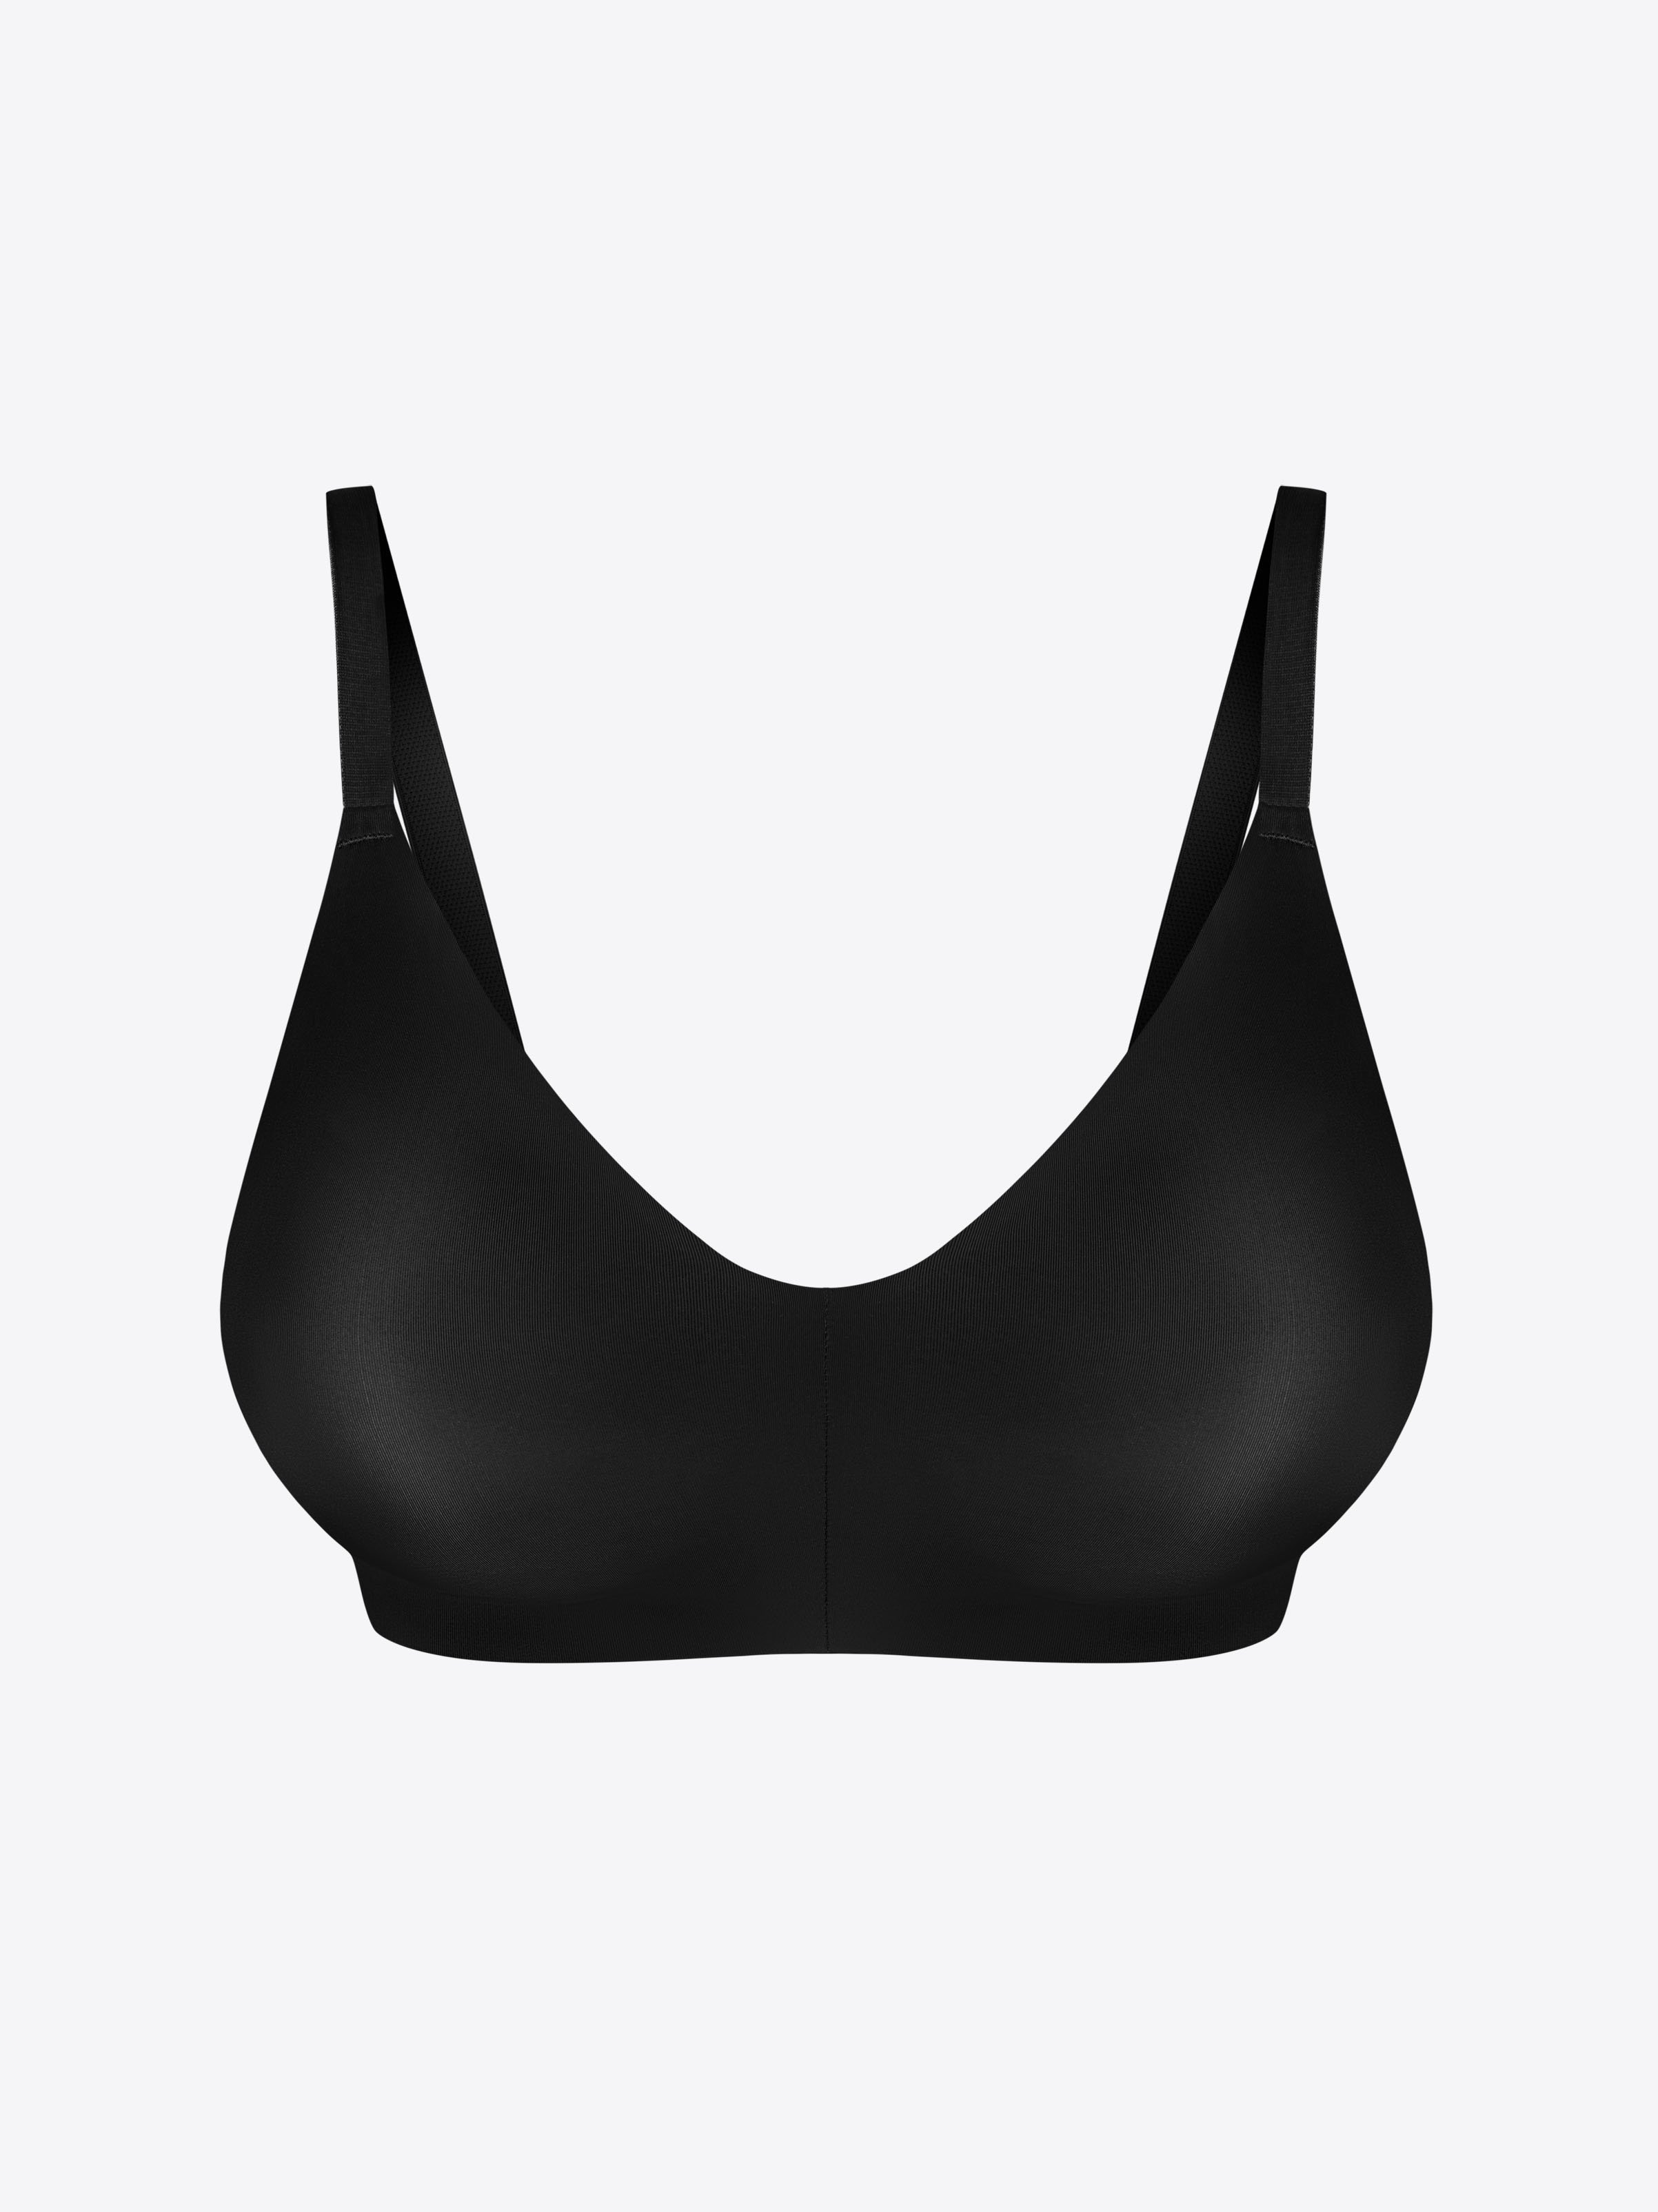 CHAINSTORE BLACK UNDERWIRED MOULDED T SHIRT BRA SIZE 36D CUP